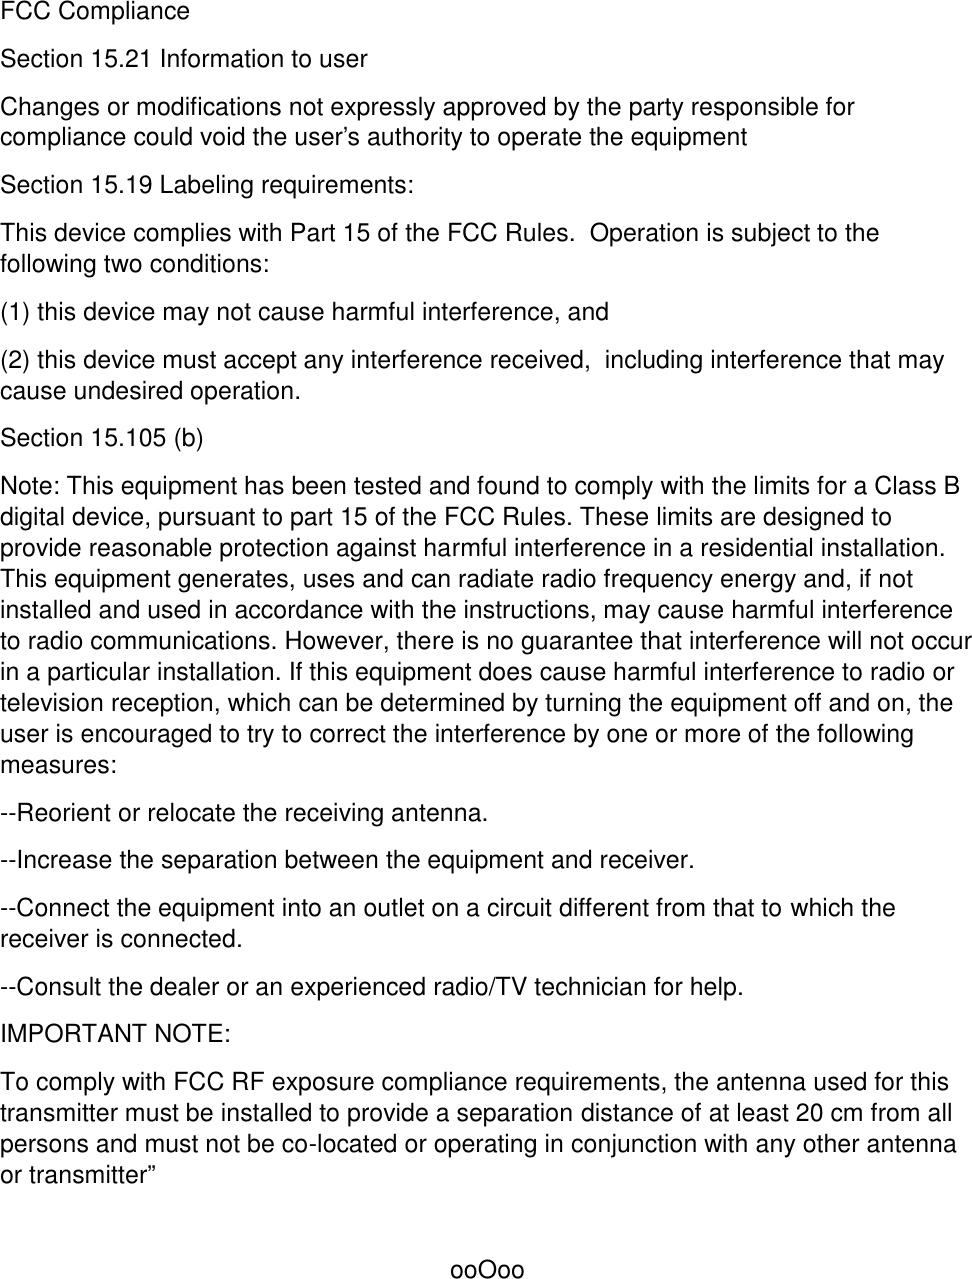 FCC ComplianceSection 15.21 Information to userChanges or modifications not expressly approved by the party responsible forcompliance could void the user&apos;s authority to operate the equipmentSection 15.19 Labeling requirements:This device complies with Part 15 of the FCC Rules.  Operation is subject to thefollowing two conditions:(1) this device may not cause harmful interference, and(2) this device must accept any interference received,  including interference that maycause undesired operation.Section 15.105 (b)Note: This equipment has been tested and found to comply with the limits for a Class Bdigital device, pursuant to part 15 of the FCC Rules. These limits are designed toprovide reasonable protection against harmful interference in a residential installation.This equipment generates, uses and can radiate radio frequency energy and, if notinstalled and used in accordance with the instructions, may cause harmful interferenceto radio communications. However, there is no guarantee that interference will not occurin a particular installation. If this equipment does cause harmful interference to radio ortelevision reception, which can be determined by turning the equipment off and on, theuser is encouraged to try to correct the interference by one or more of the followingmeasures:--Reorient or relocate the receiving antenna.--Increase the separation between the equipment and receiver.--Connect the equipment into an outlet on a circuit different from that to which thereceiver is connected.--Consult the dealer or an experienced radio/TV technician for help.IMPORTANT NOTE:To comply with FCC RF exposure compliance requirements, the antenna used for thistransmitter must be installed to provide a separation distance of at least 20 cm from allpersons and must not be co-located or operating in conjunction with any other antennaor transmitter”ooOoo